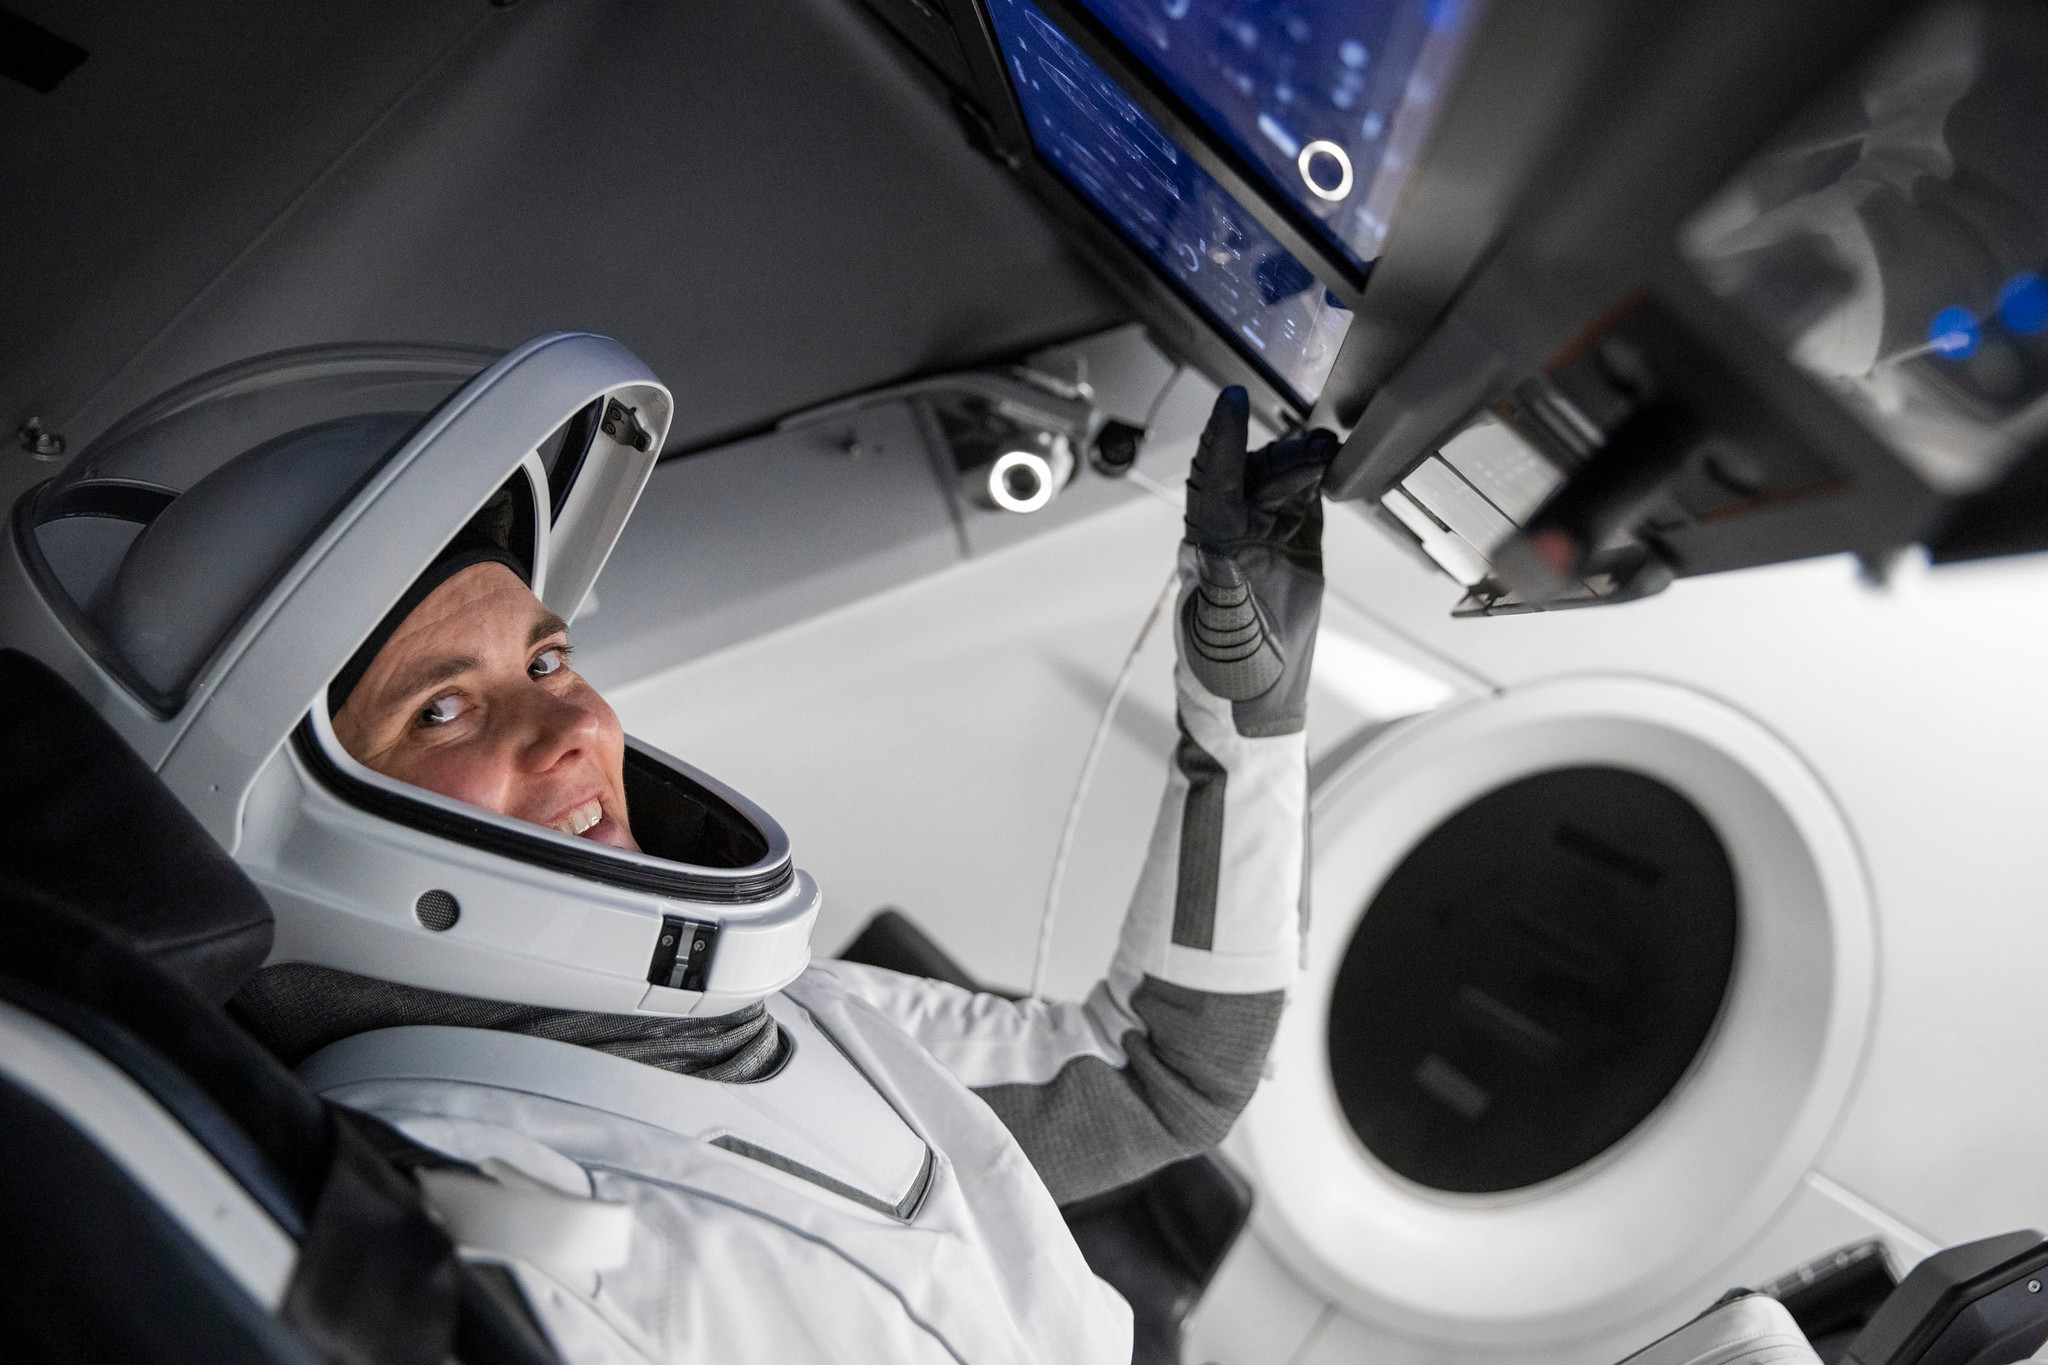 SpaceX Crew-5 Mission Specialist Anna Kikina from Roscosmos is pictured during a Crew Dragon cockpit training session at SpaceX headquarters in Hawthorne, California.